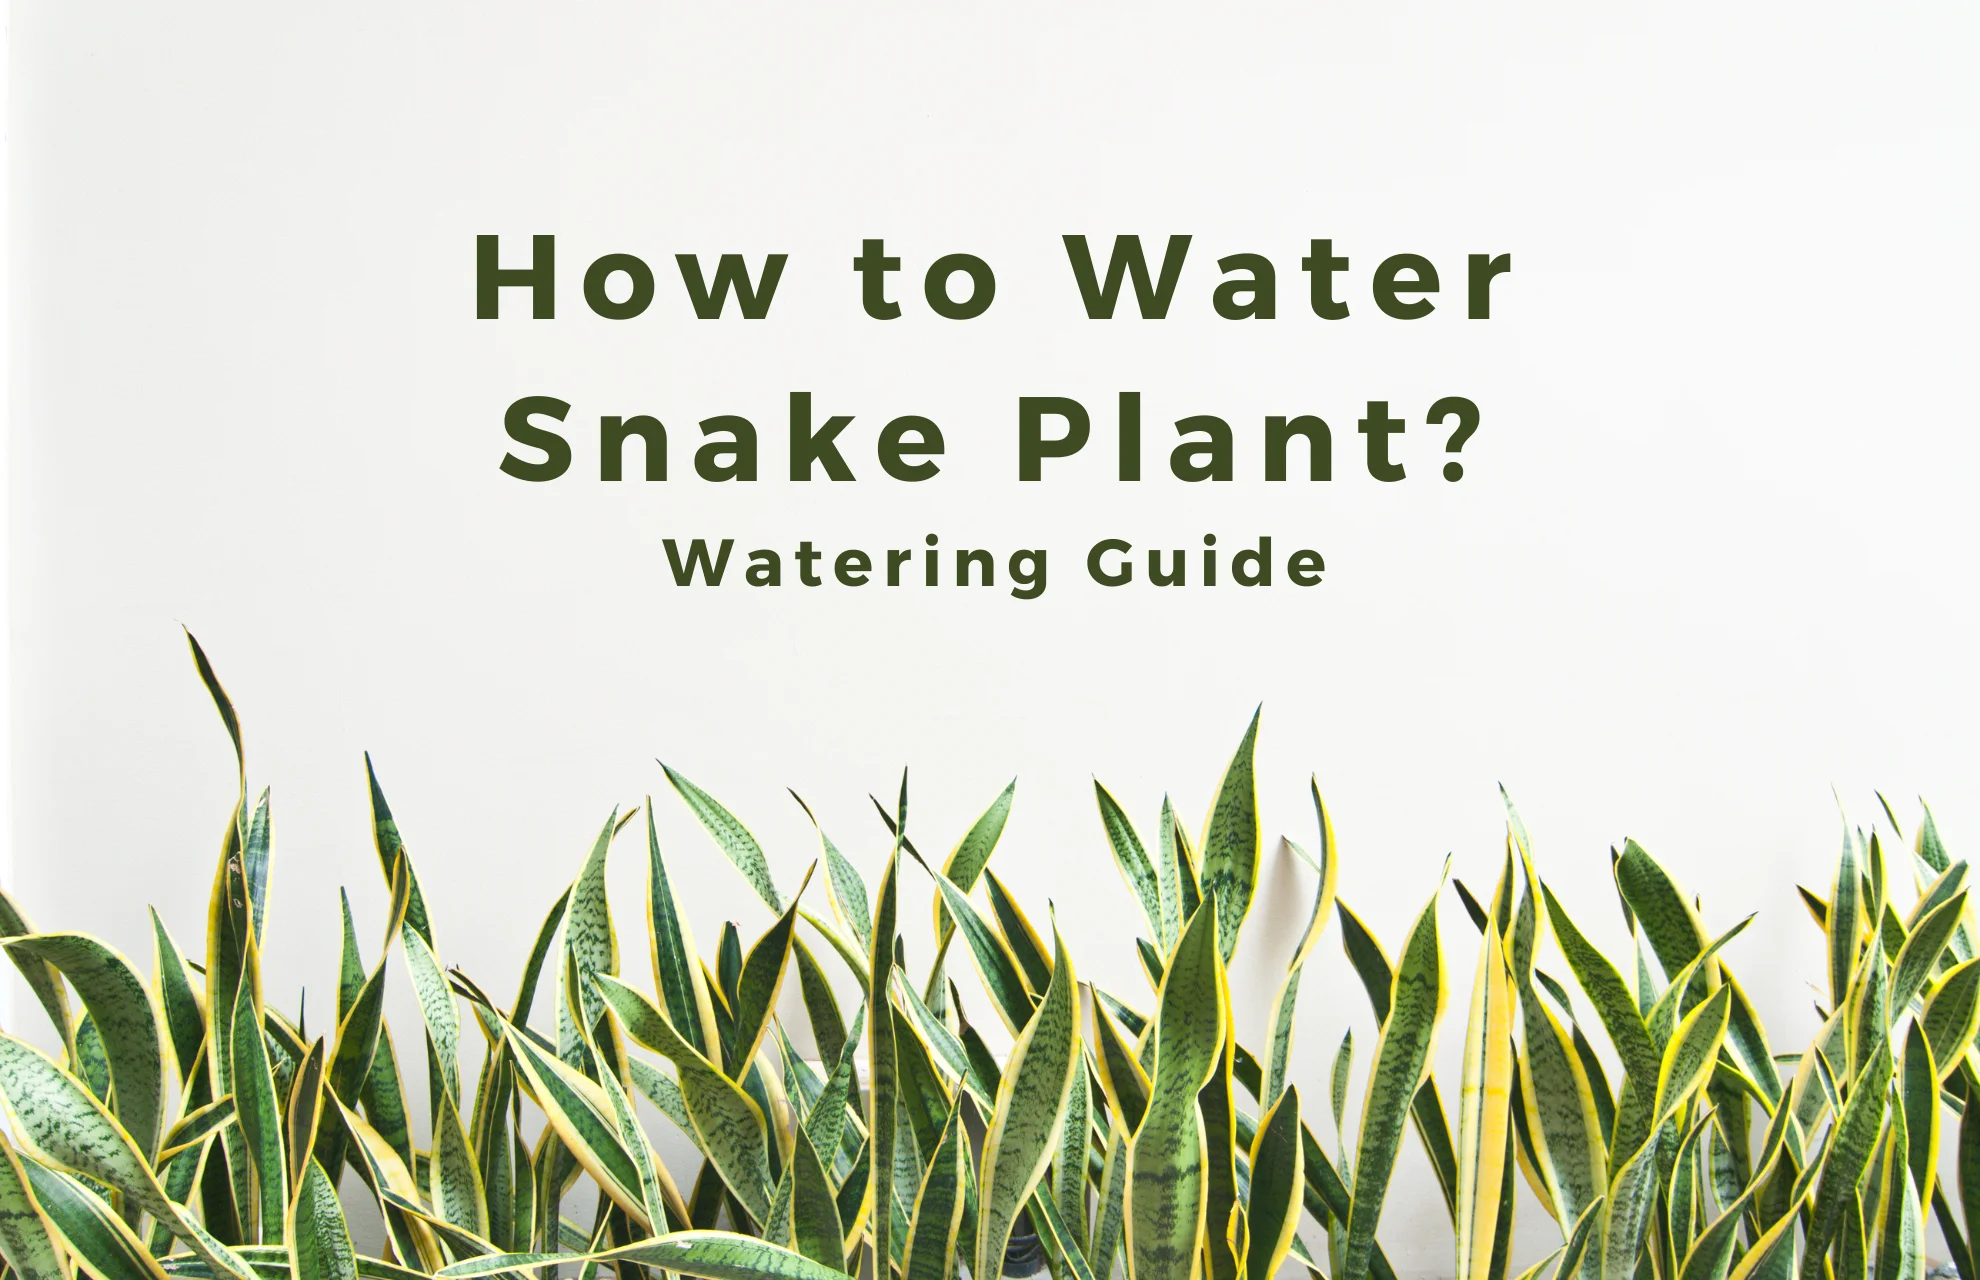 How to Water Snake Plant? Watering Guide